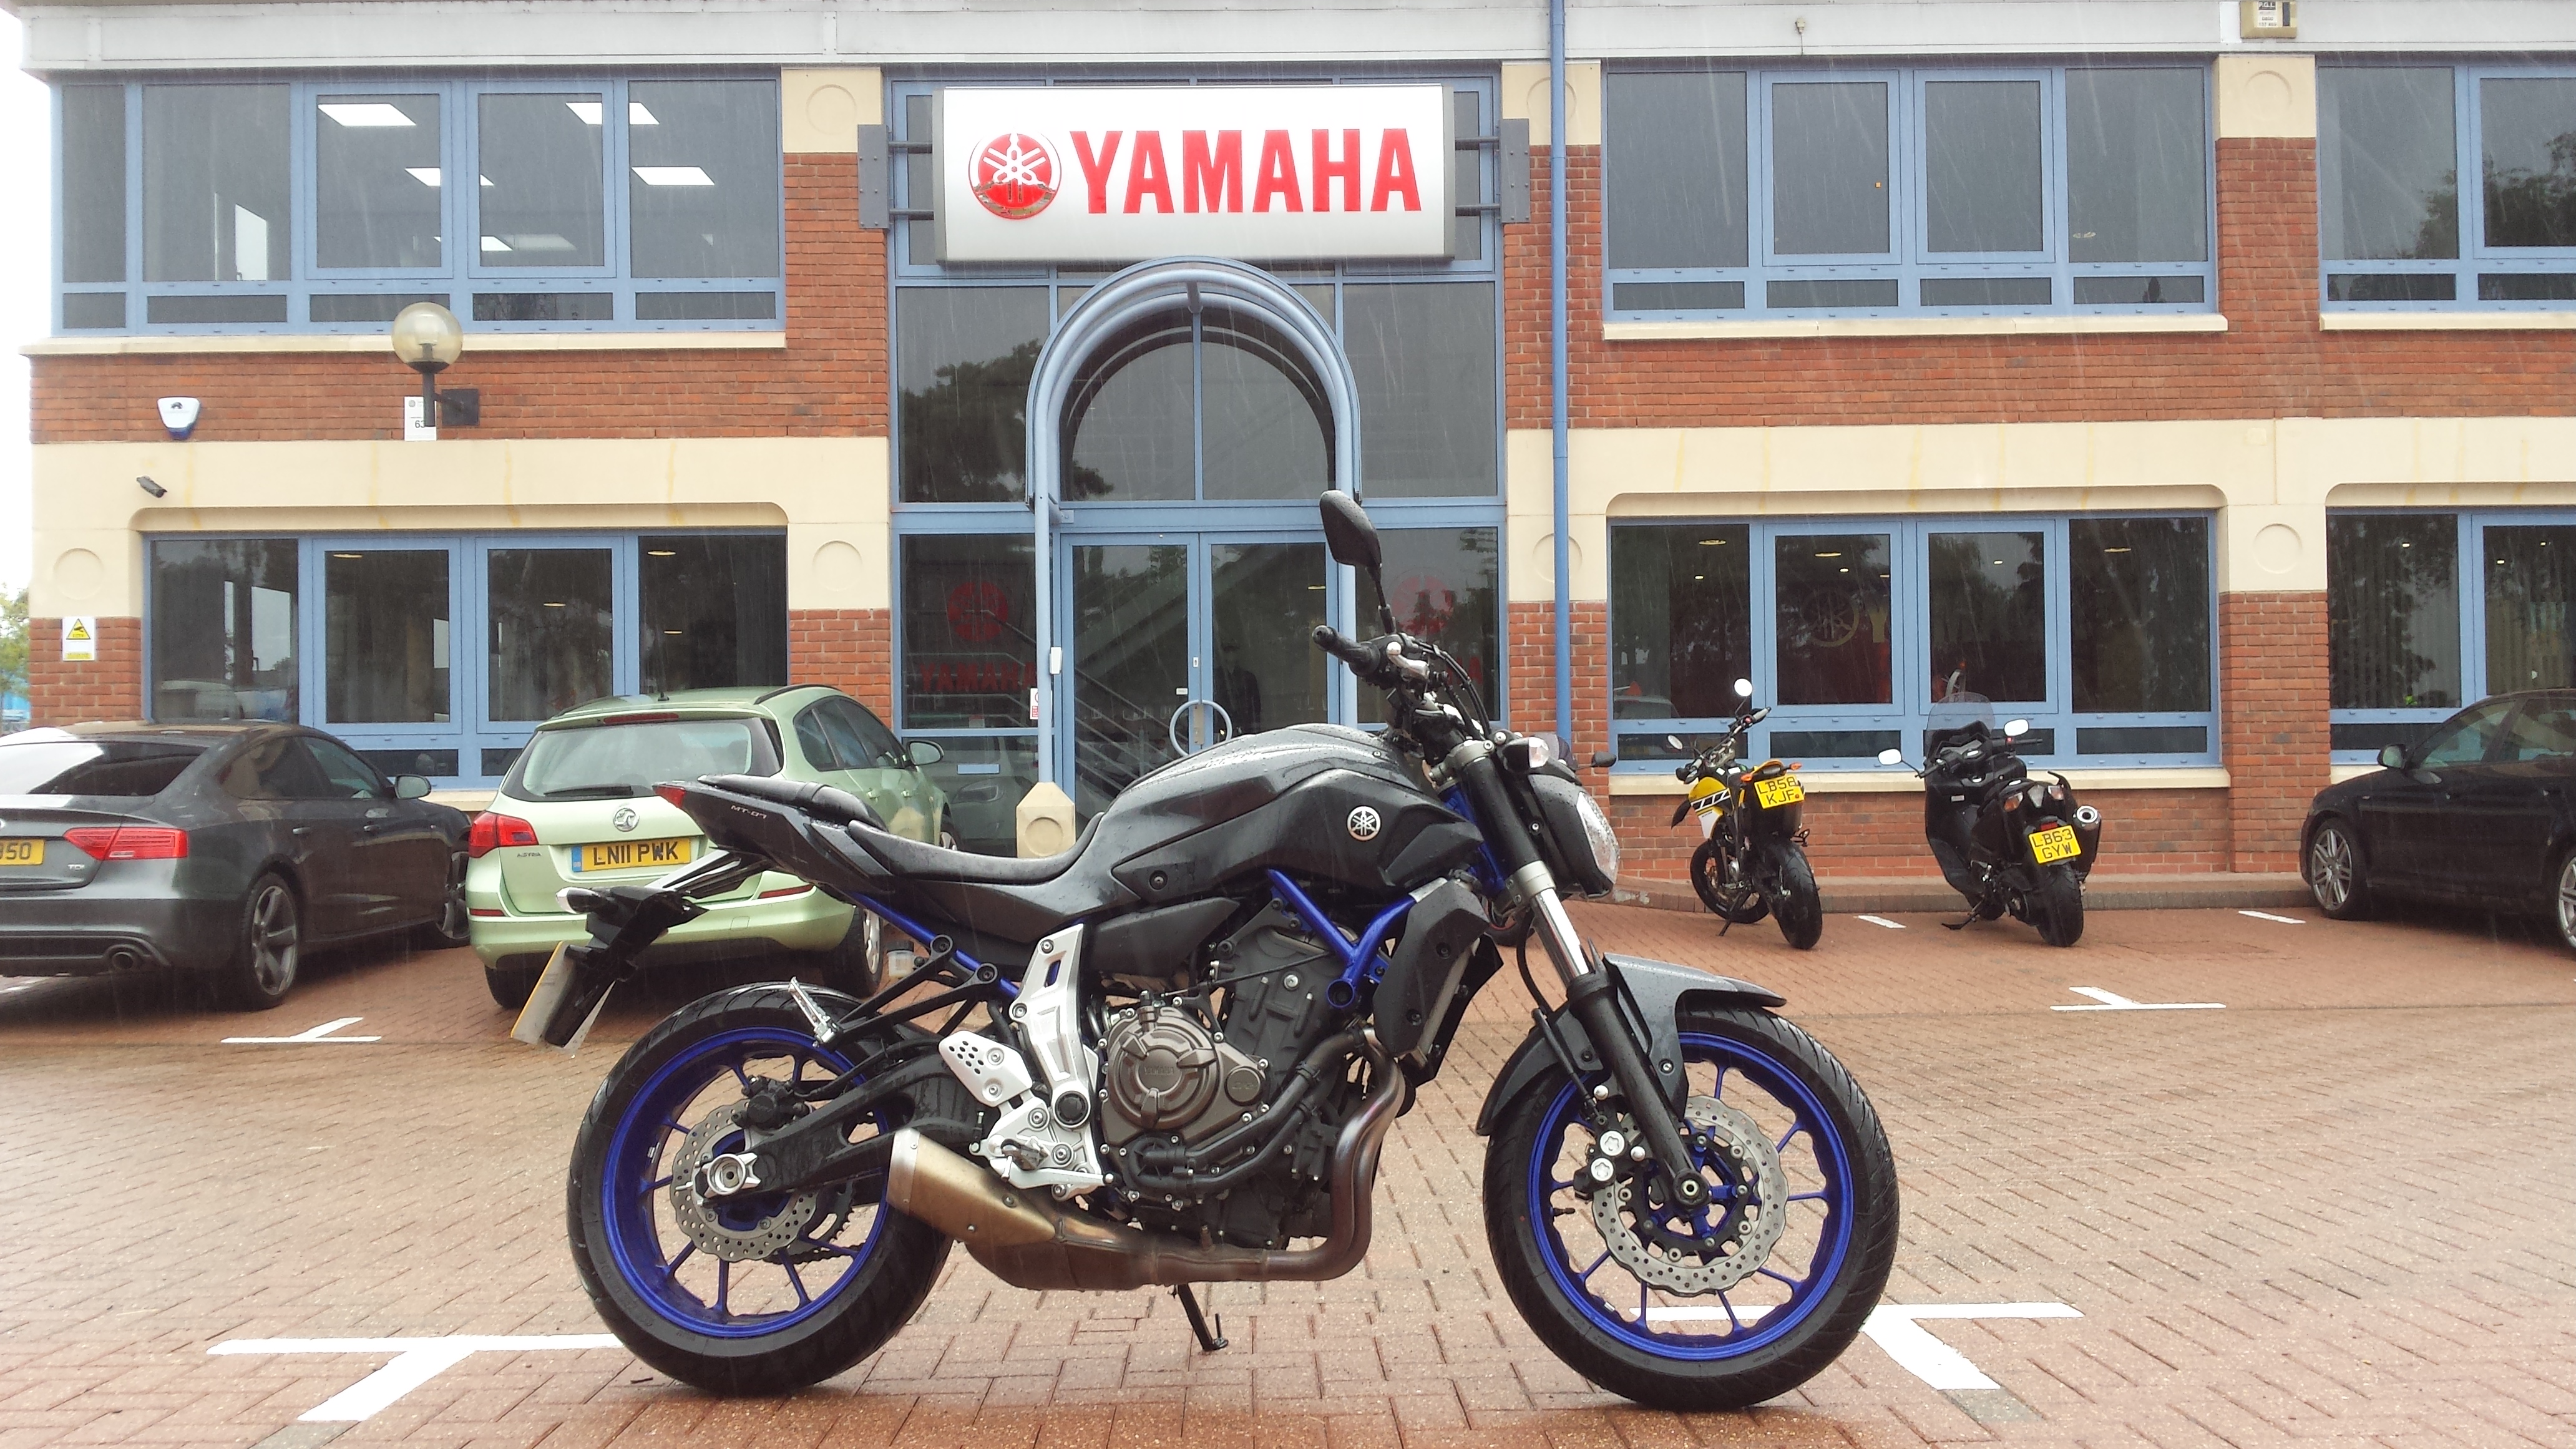 So is Yamaha's MT-07 really better than an SV650S?